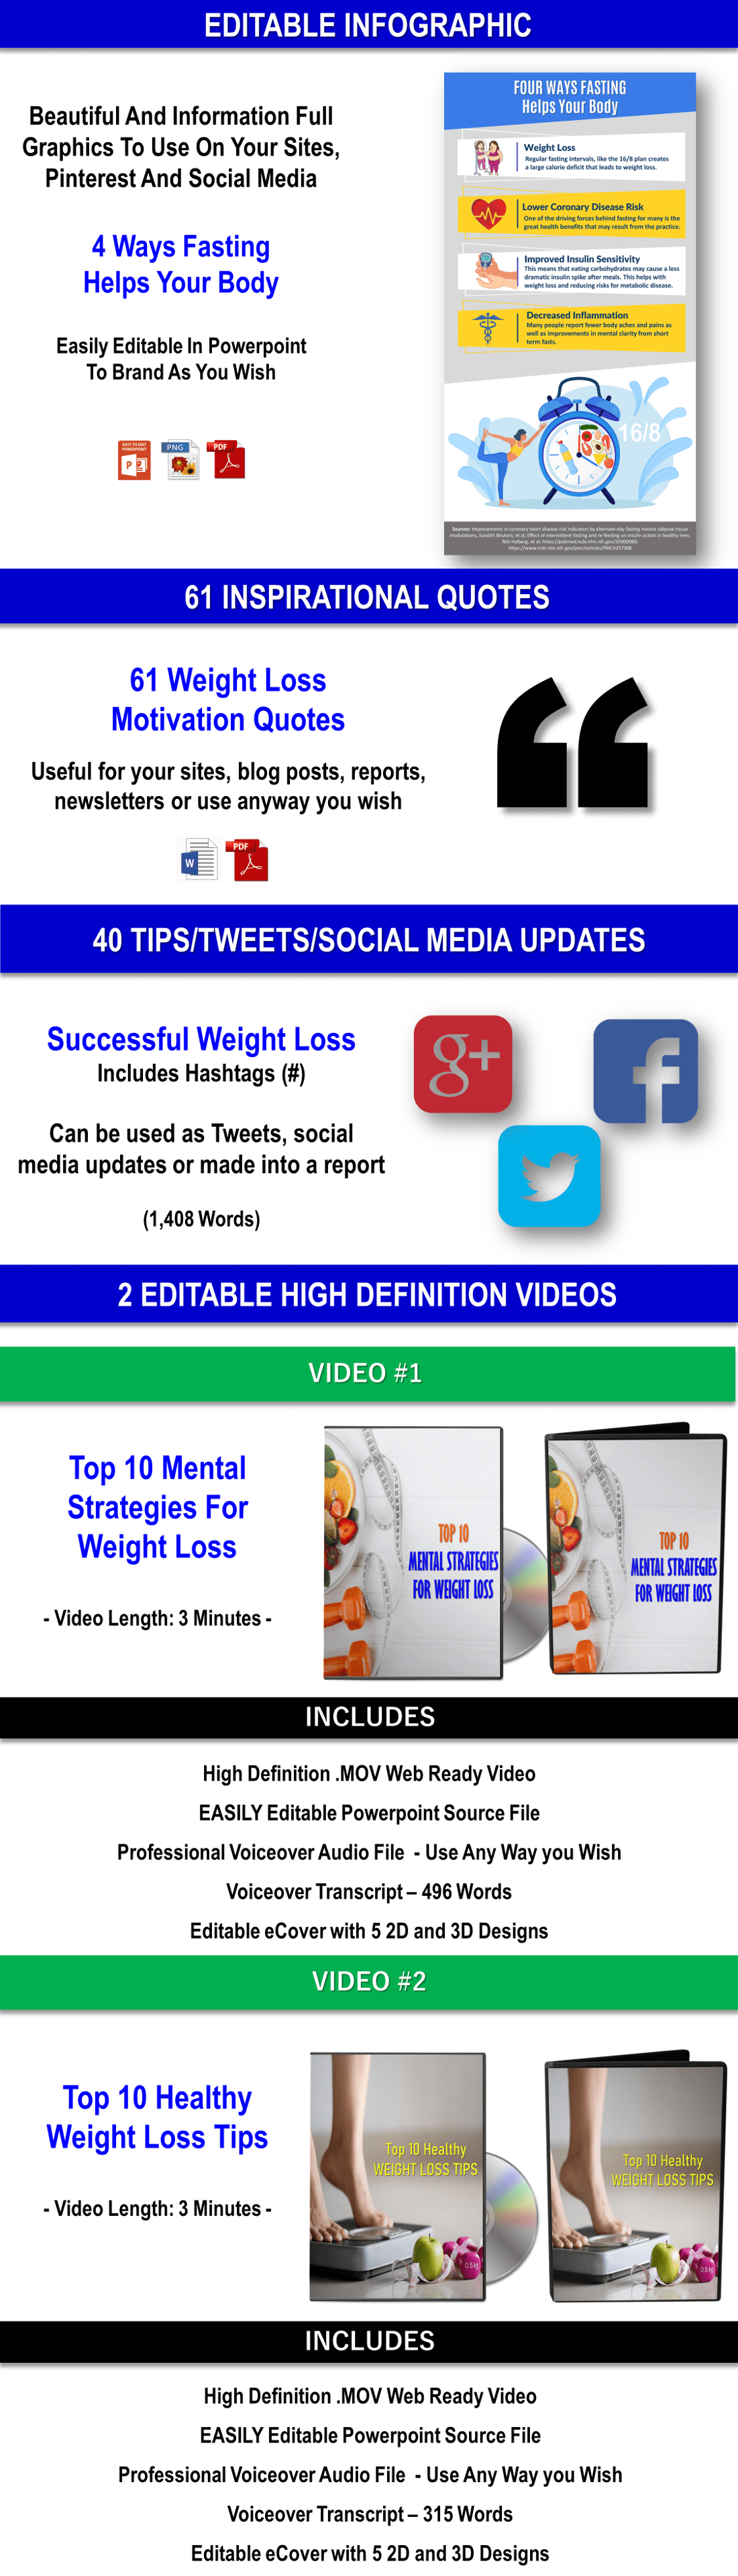 Top 10 Lists - Eating And Mindset Tips For Succesful Weight Loss - Private Label Rights